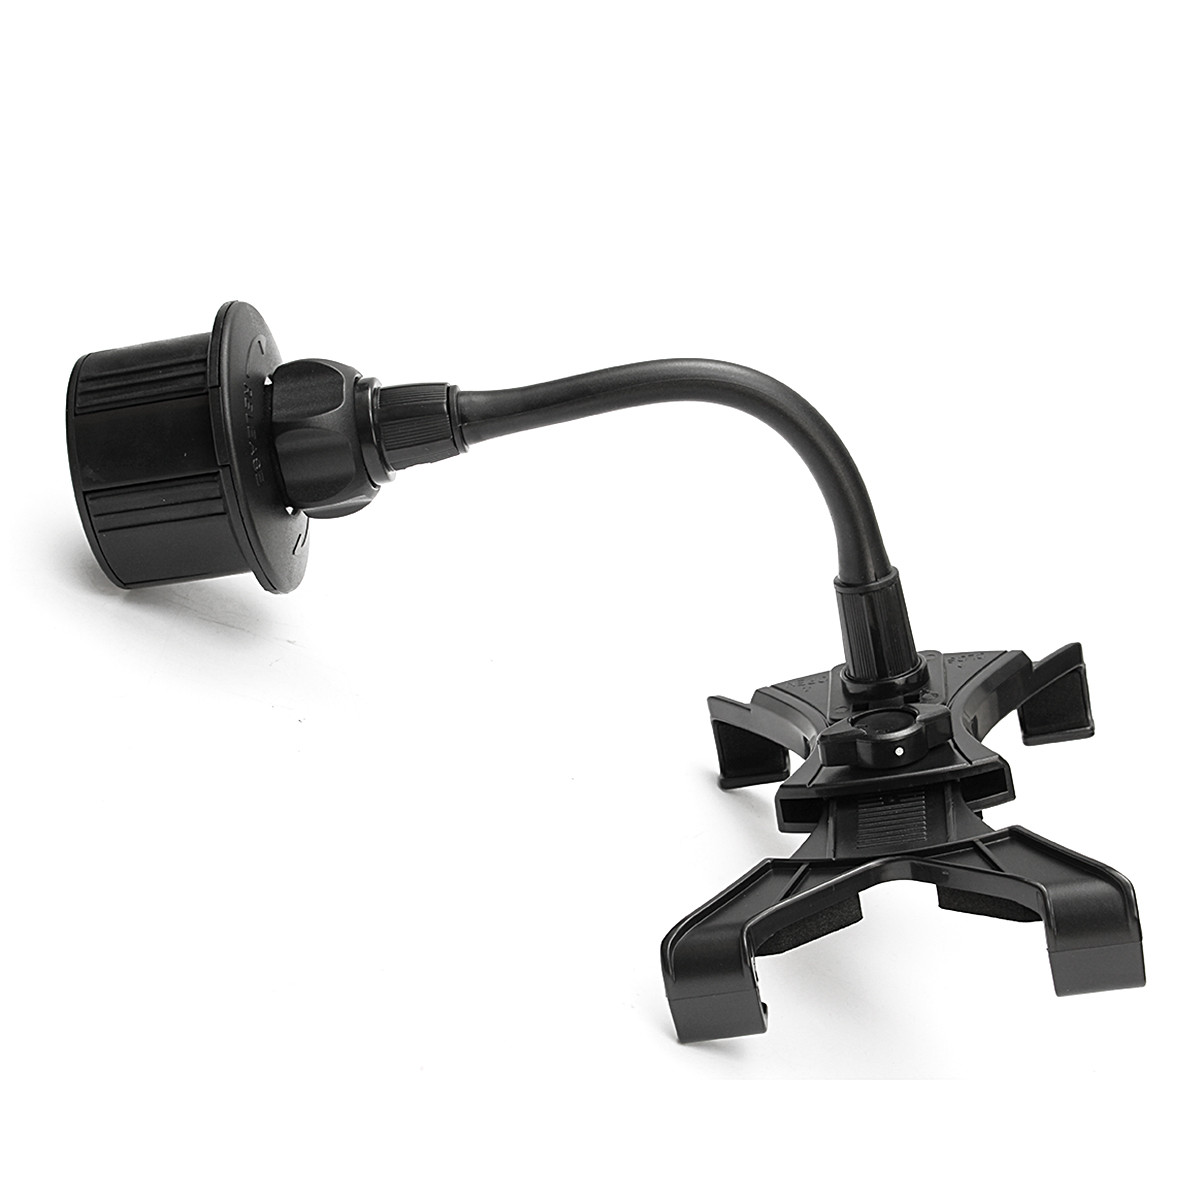 Adjustable Bendy Car Cup Holder Mount for 7 Inch to 10 Inch Tablet.